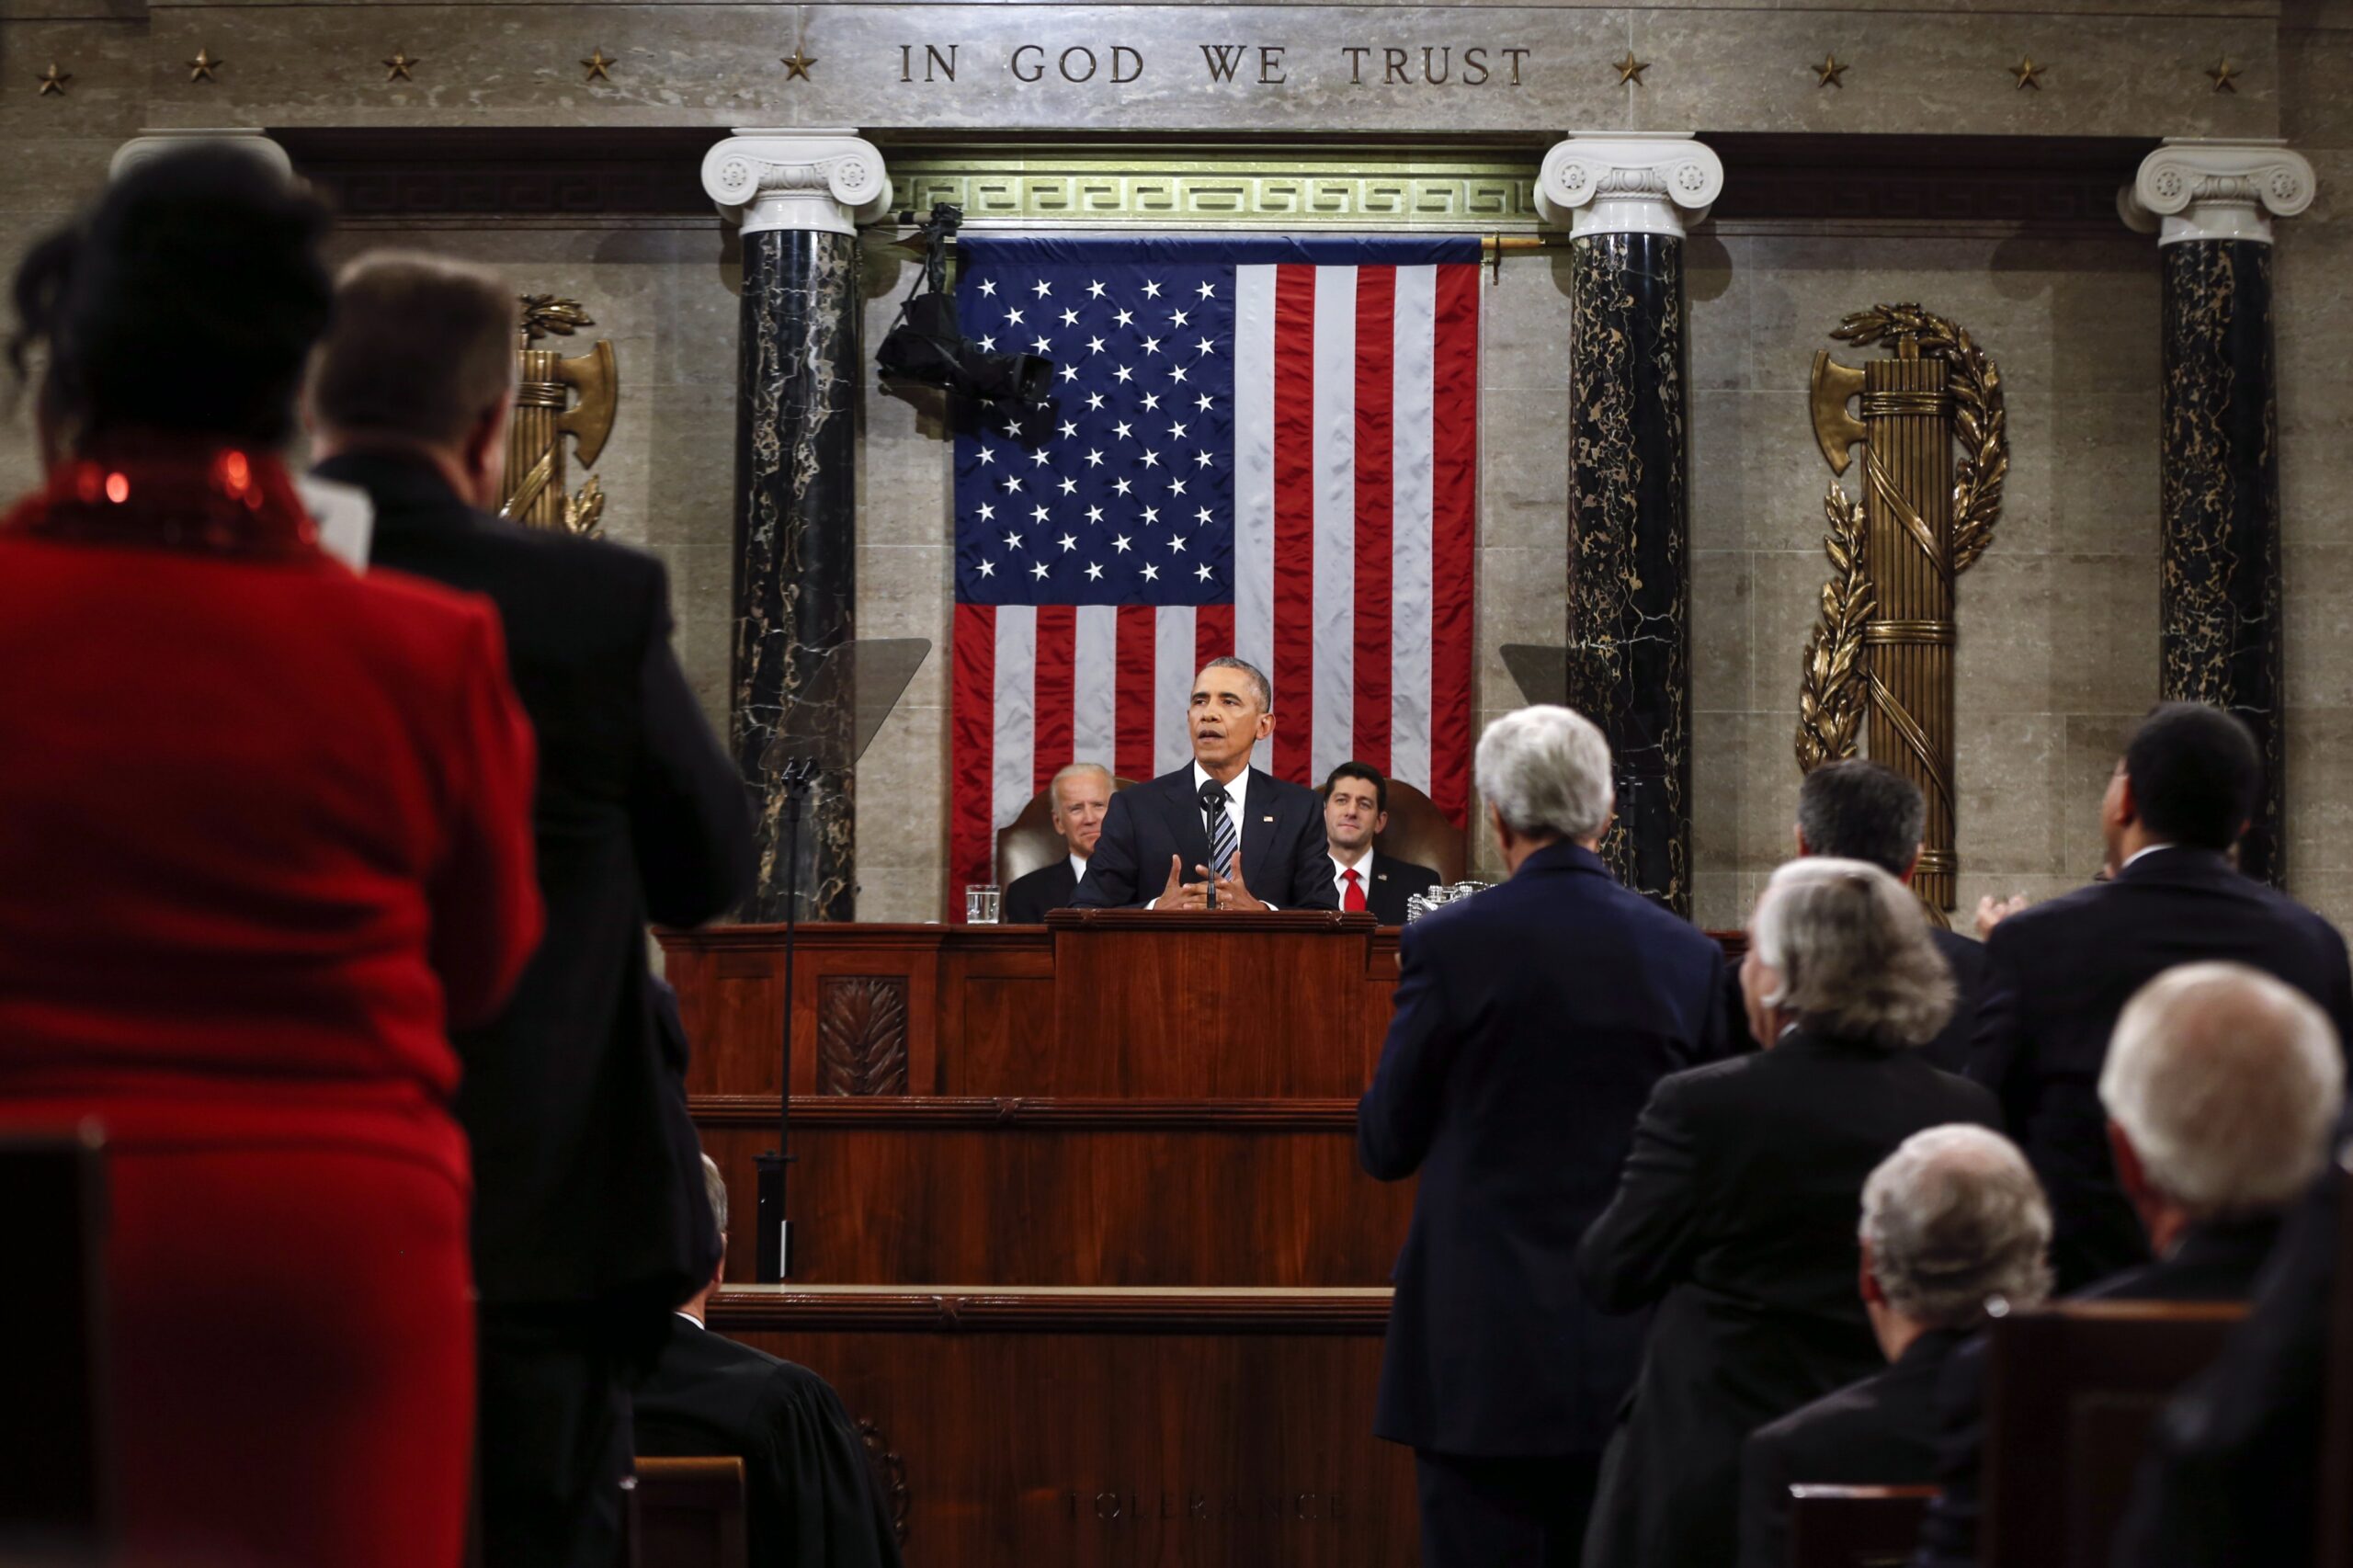 Wisconsin Activists, Members Of Congress Offer Differing Perspectives On State Of The Union